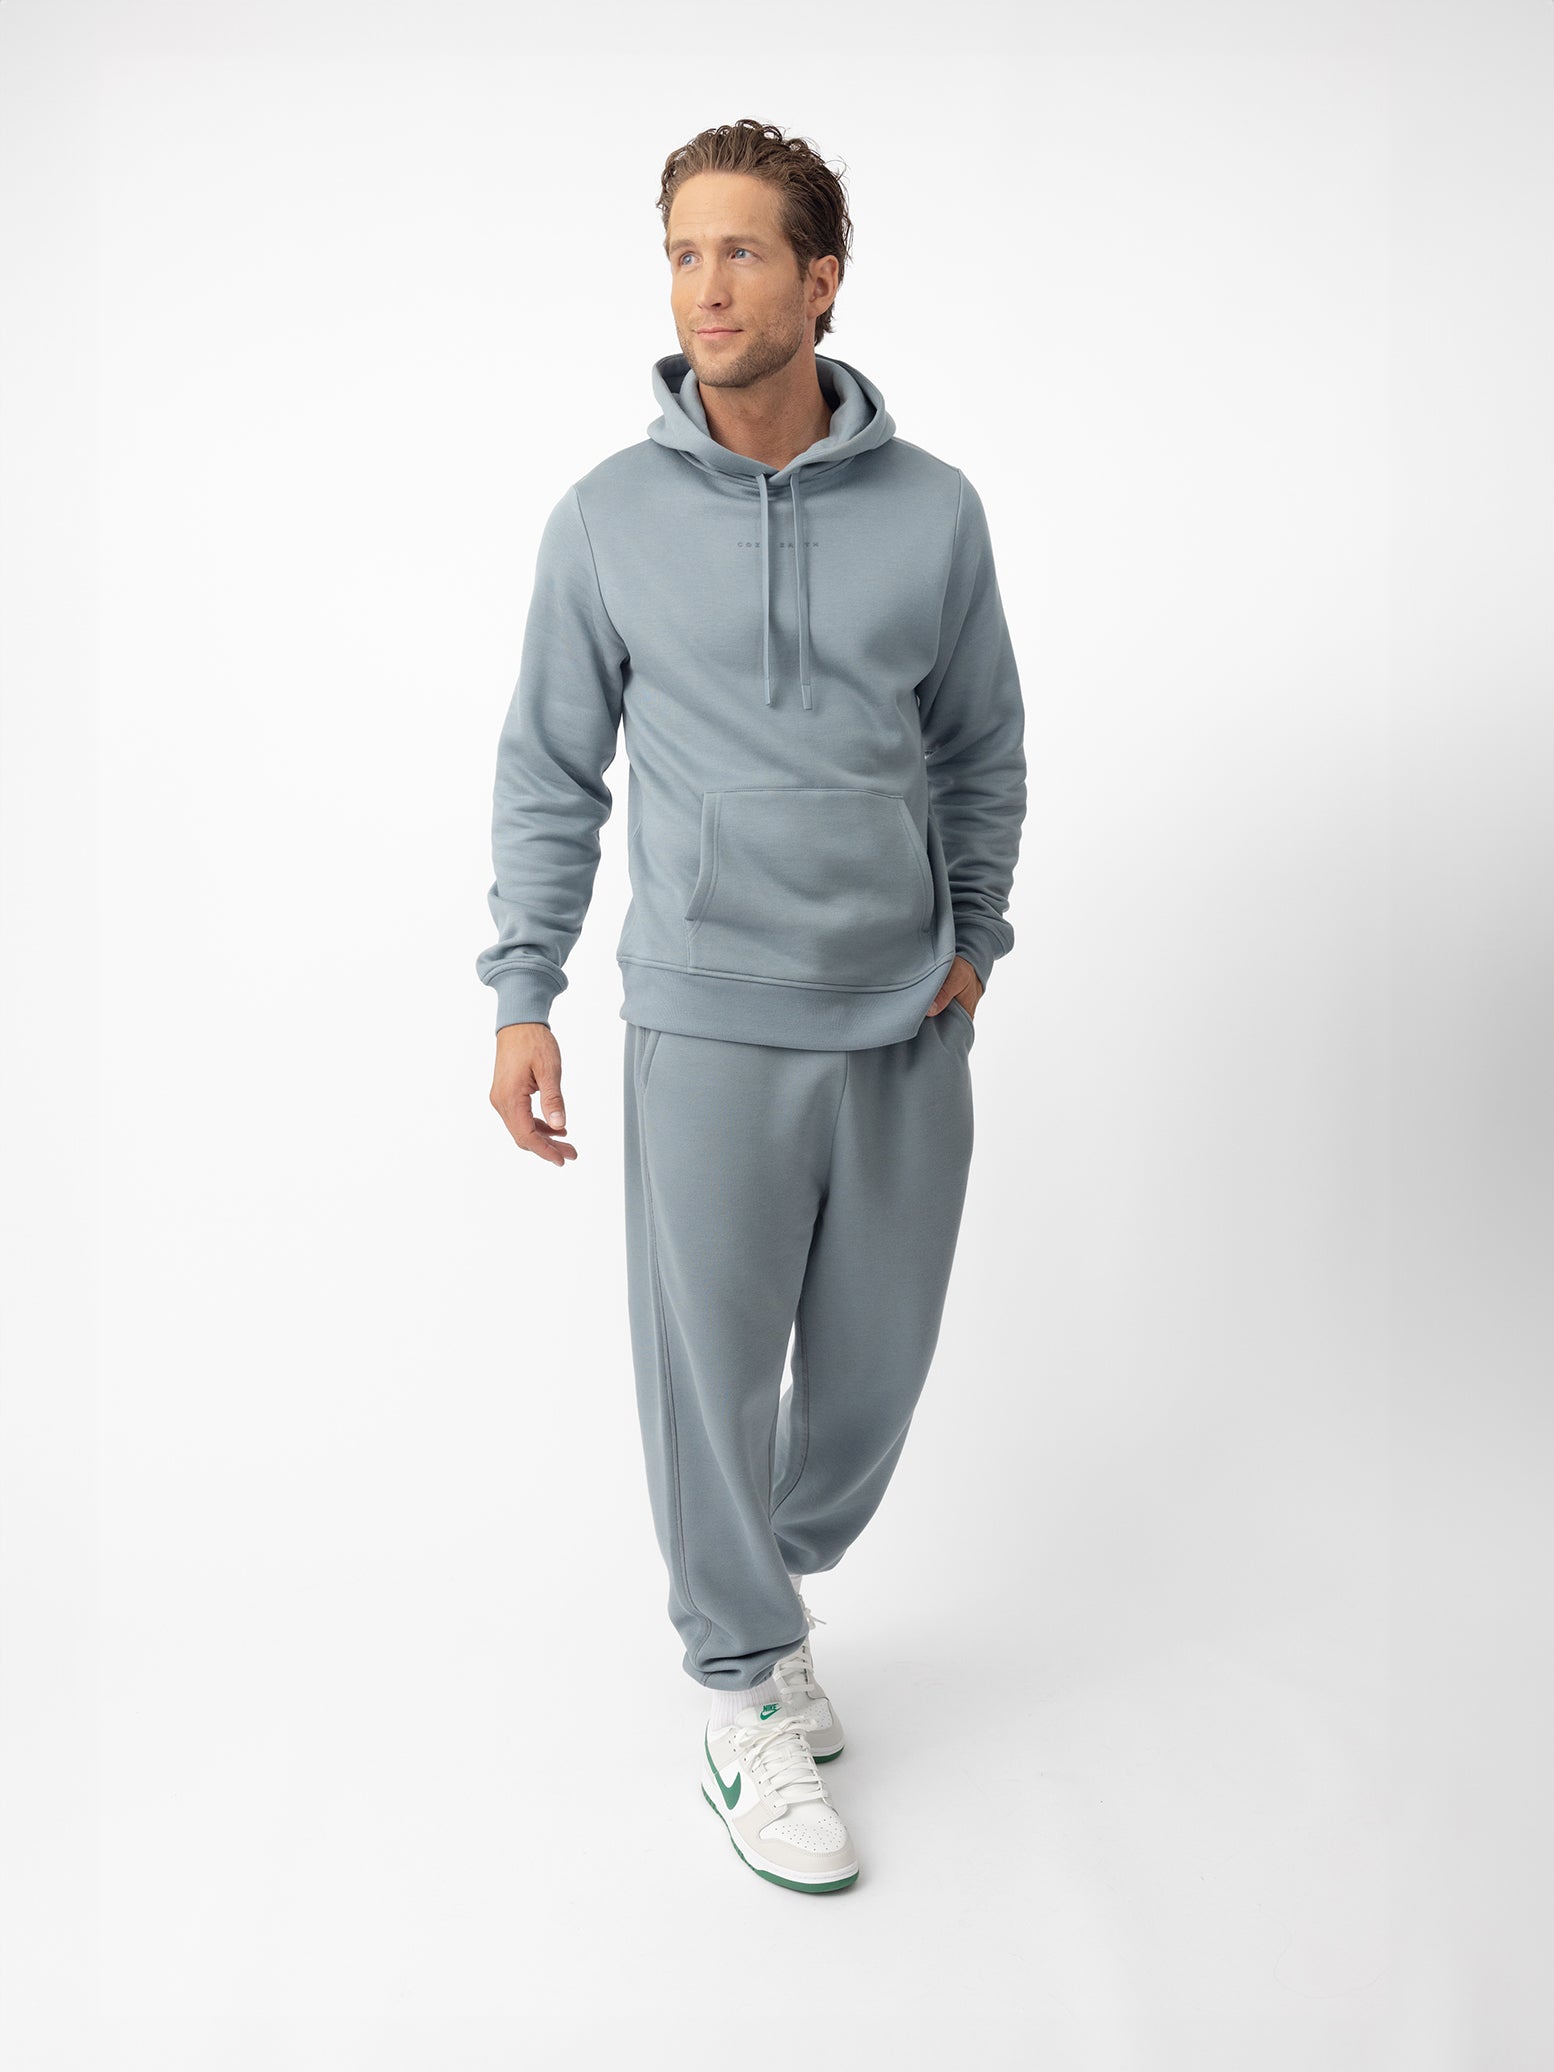 Man wearing smokey blue cityscape hoodie and sweats with white background 